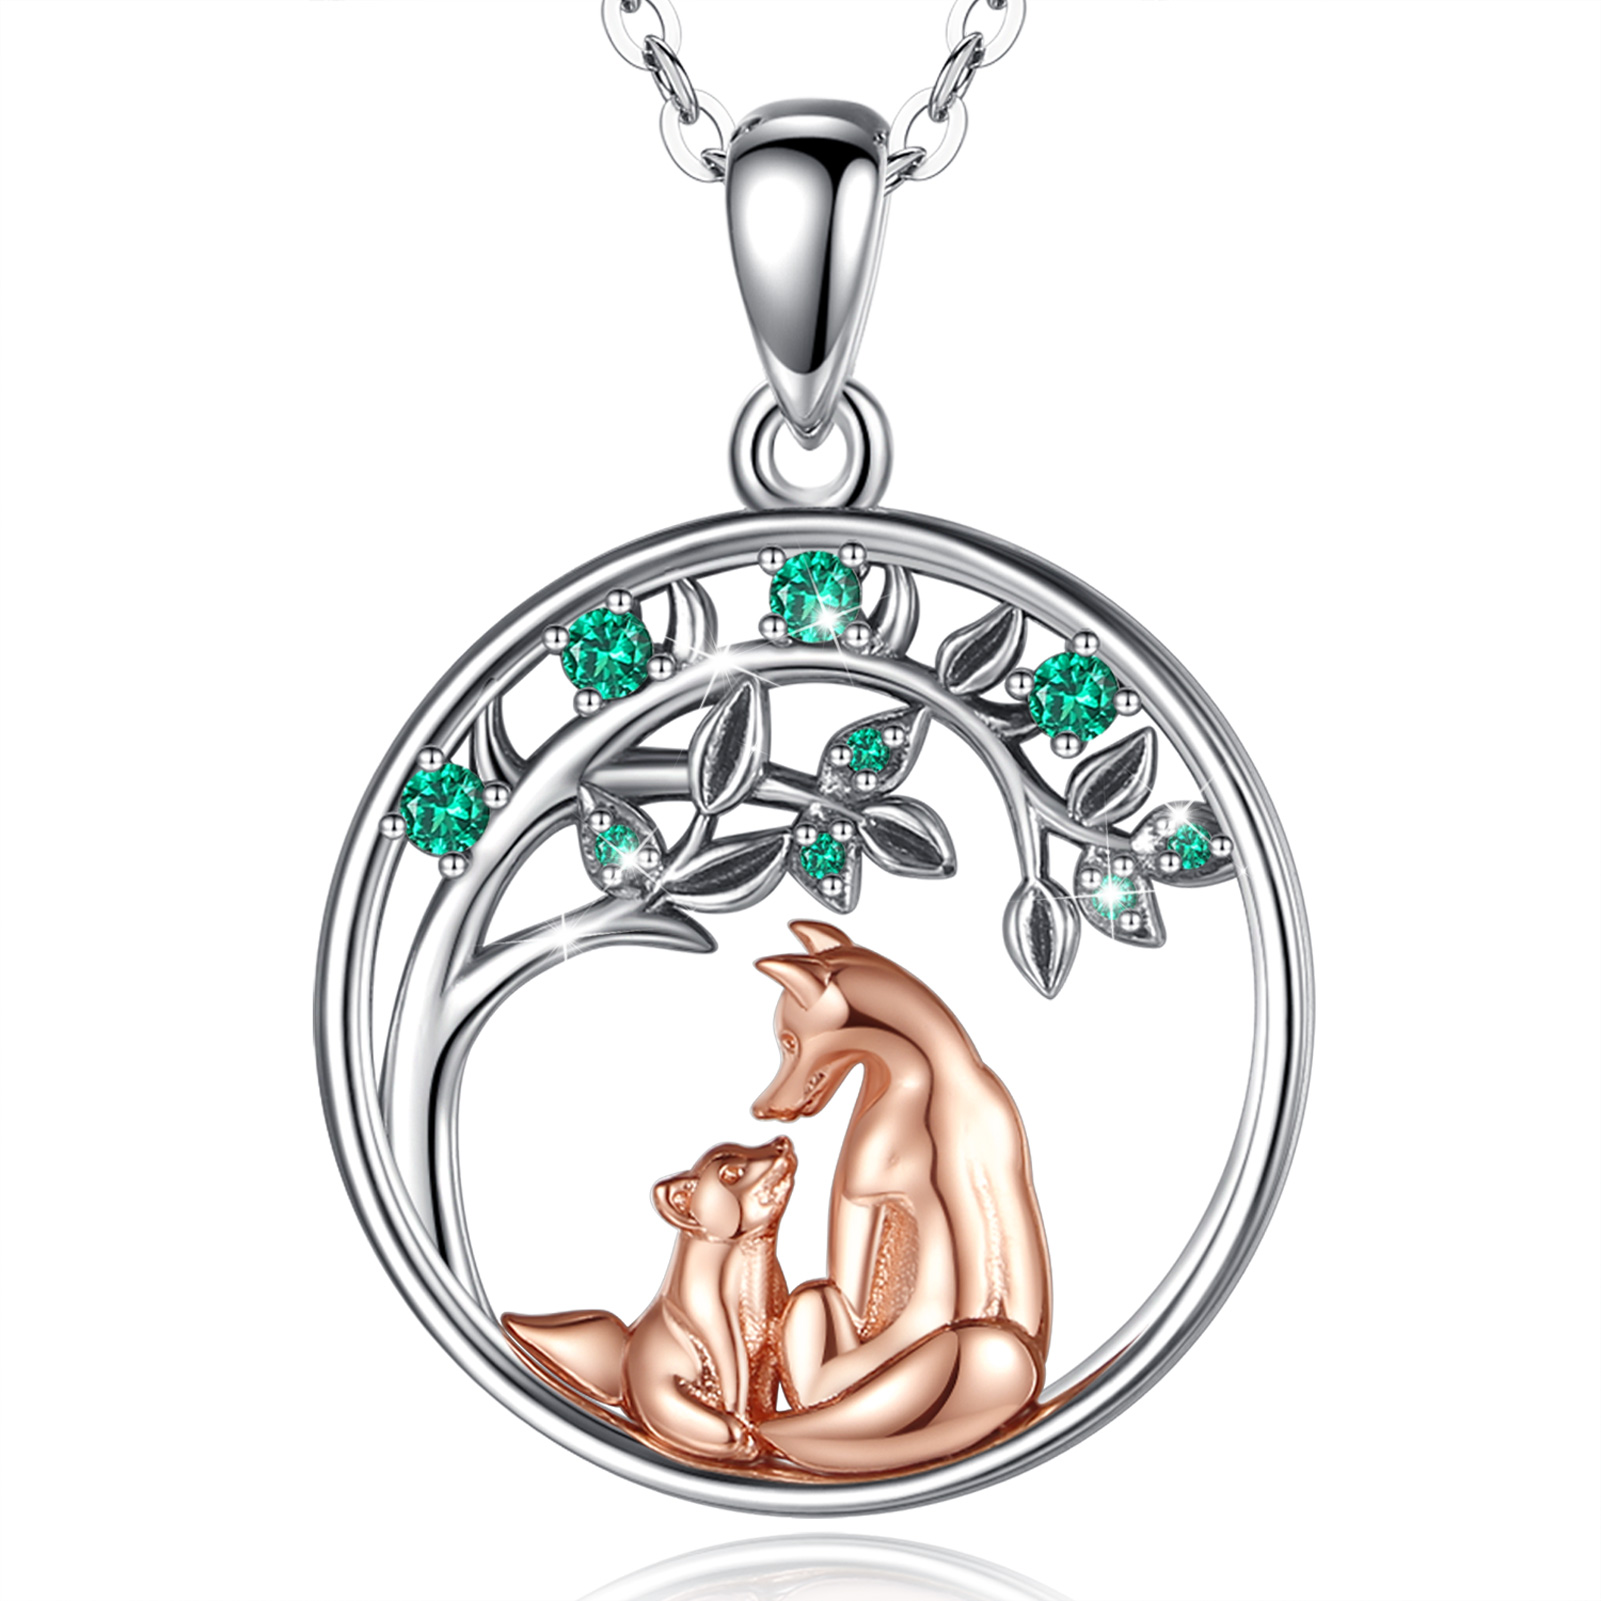 Merryshine Jewelry S925 Sterling Silver Fox Mother and Baby Pendant Necklace with Green Cubic Zirconia